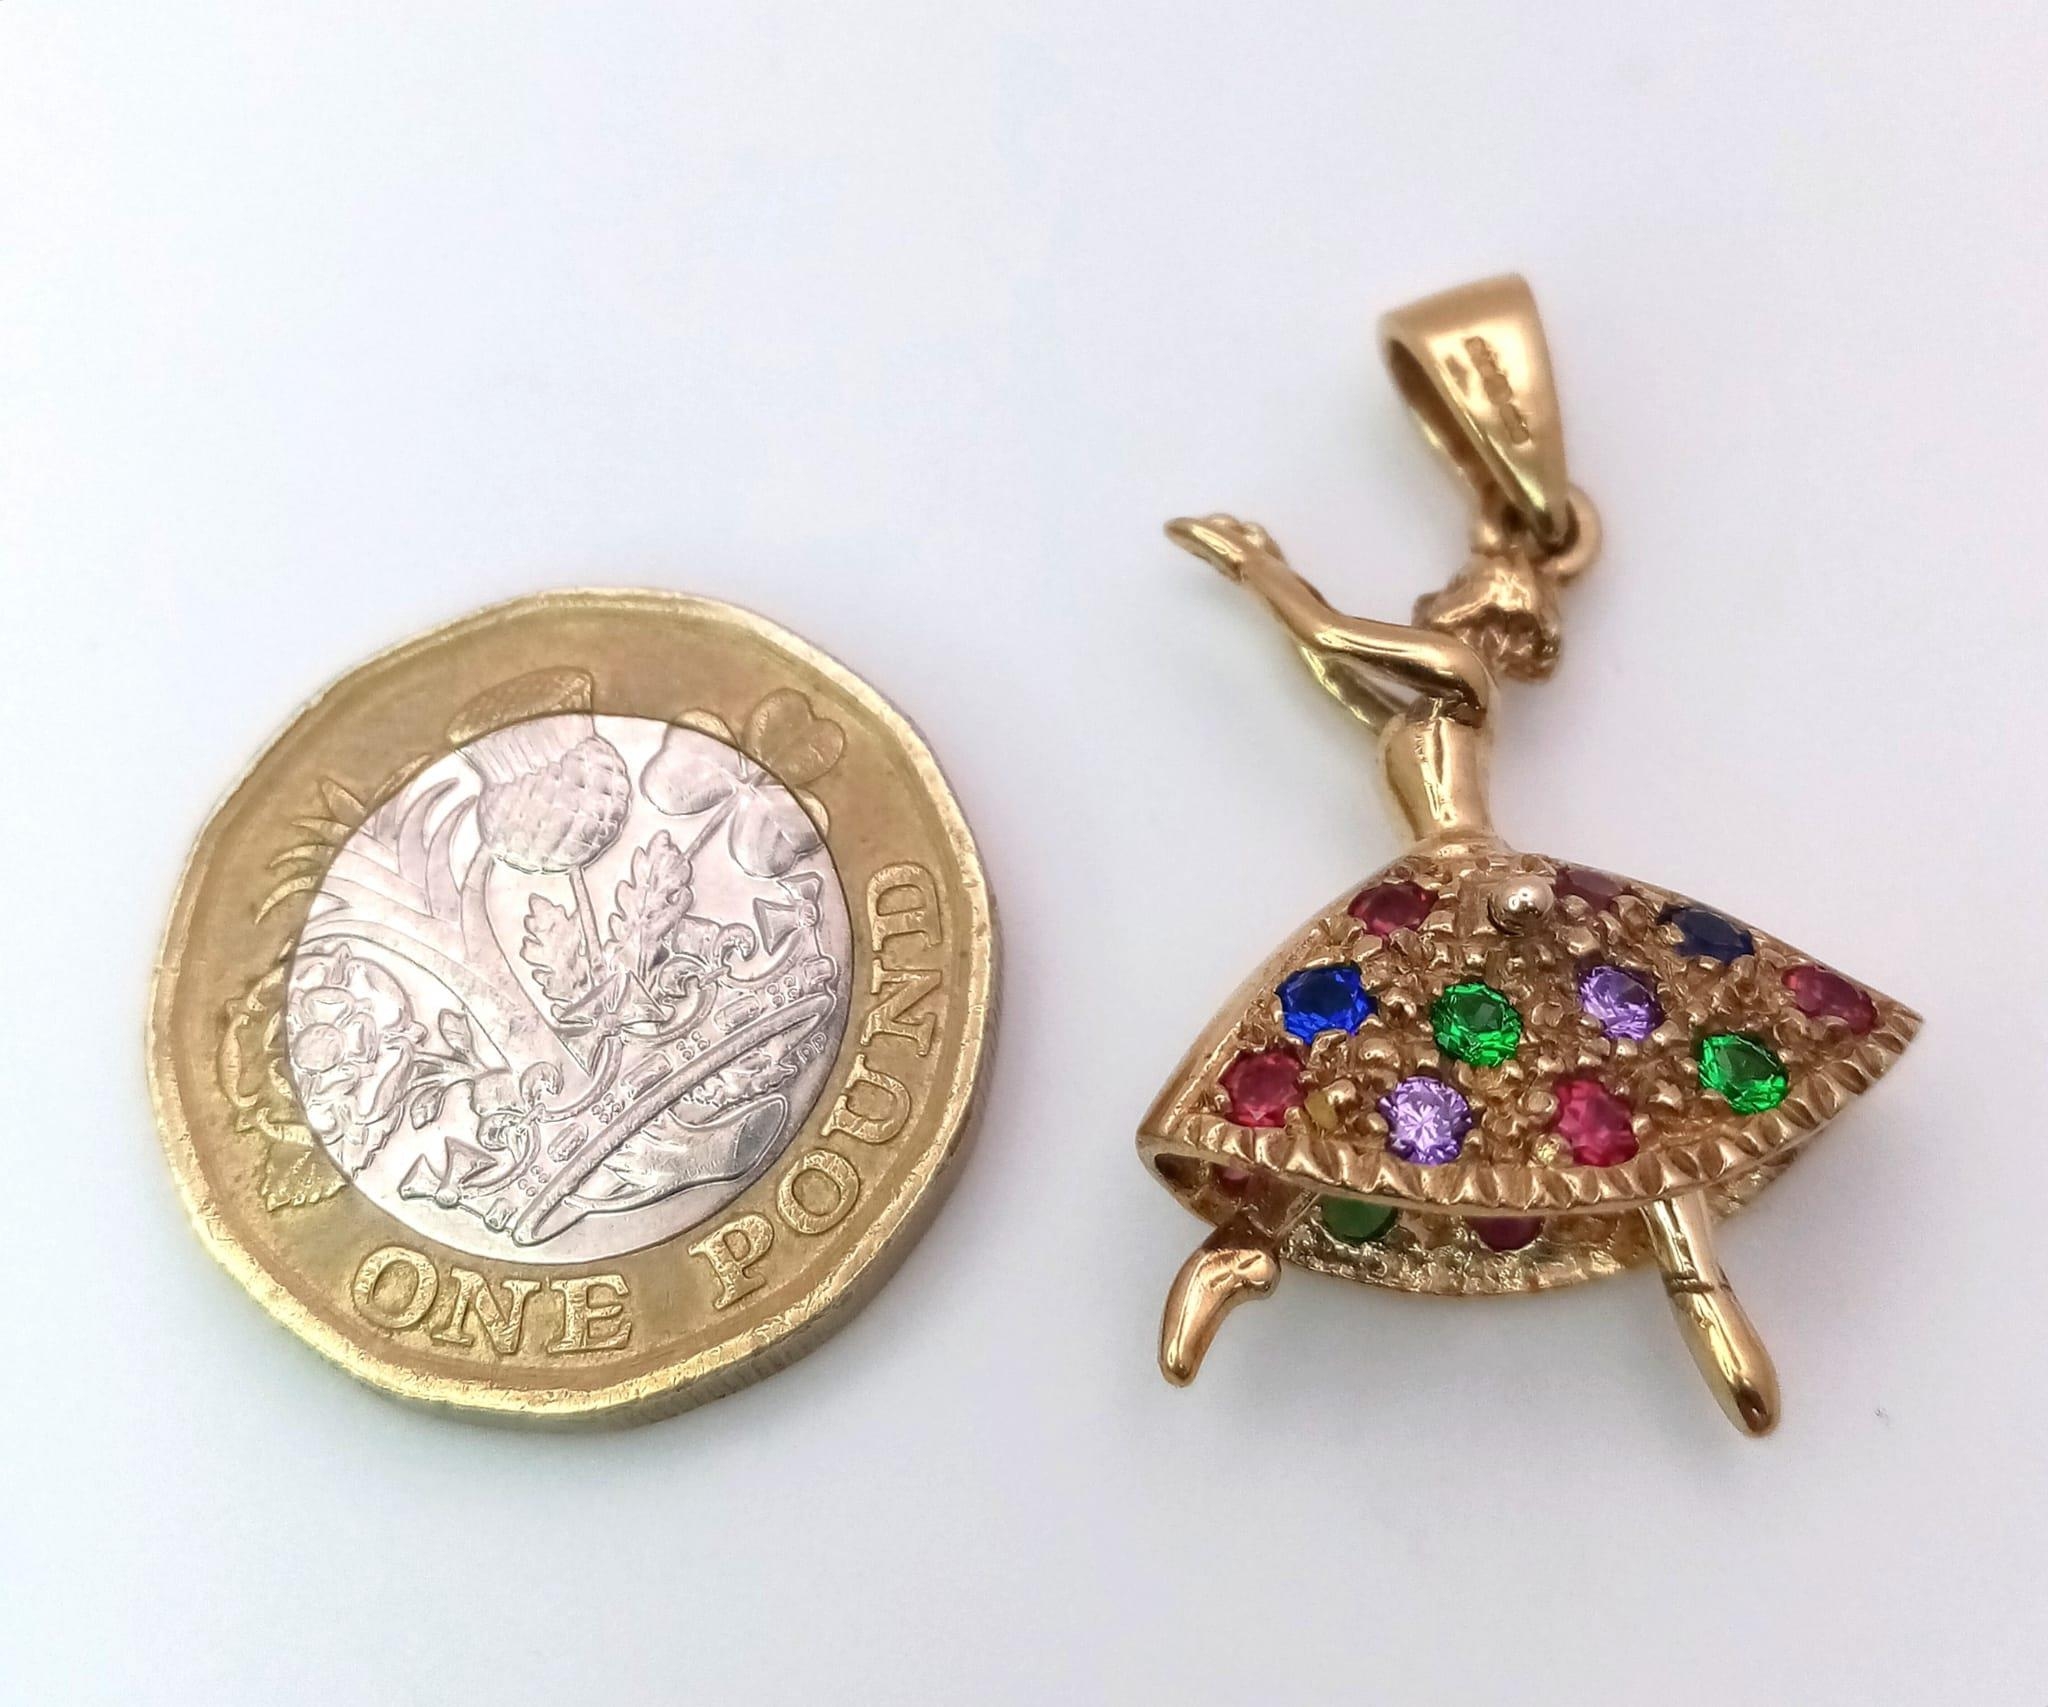 A 9kt Yellow Gold Jewelled Dancing Ballerina Charm/Pendant. Measures 3cm in length. Weight: 5.06g - Image 5 of 6